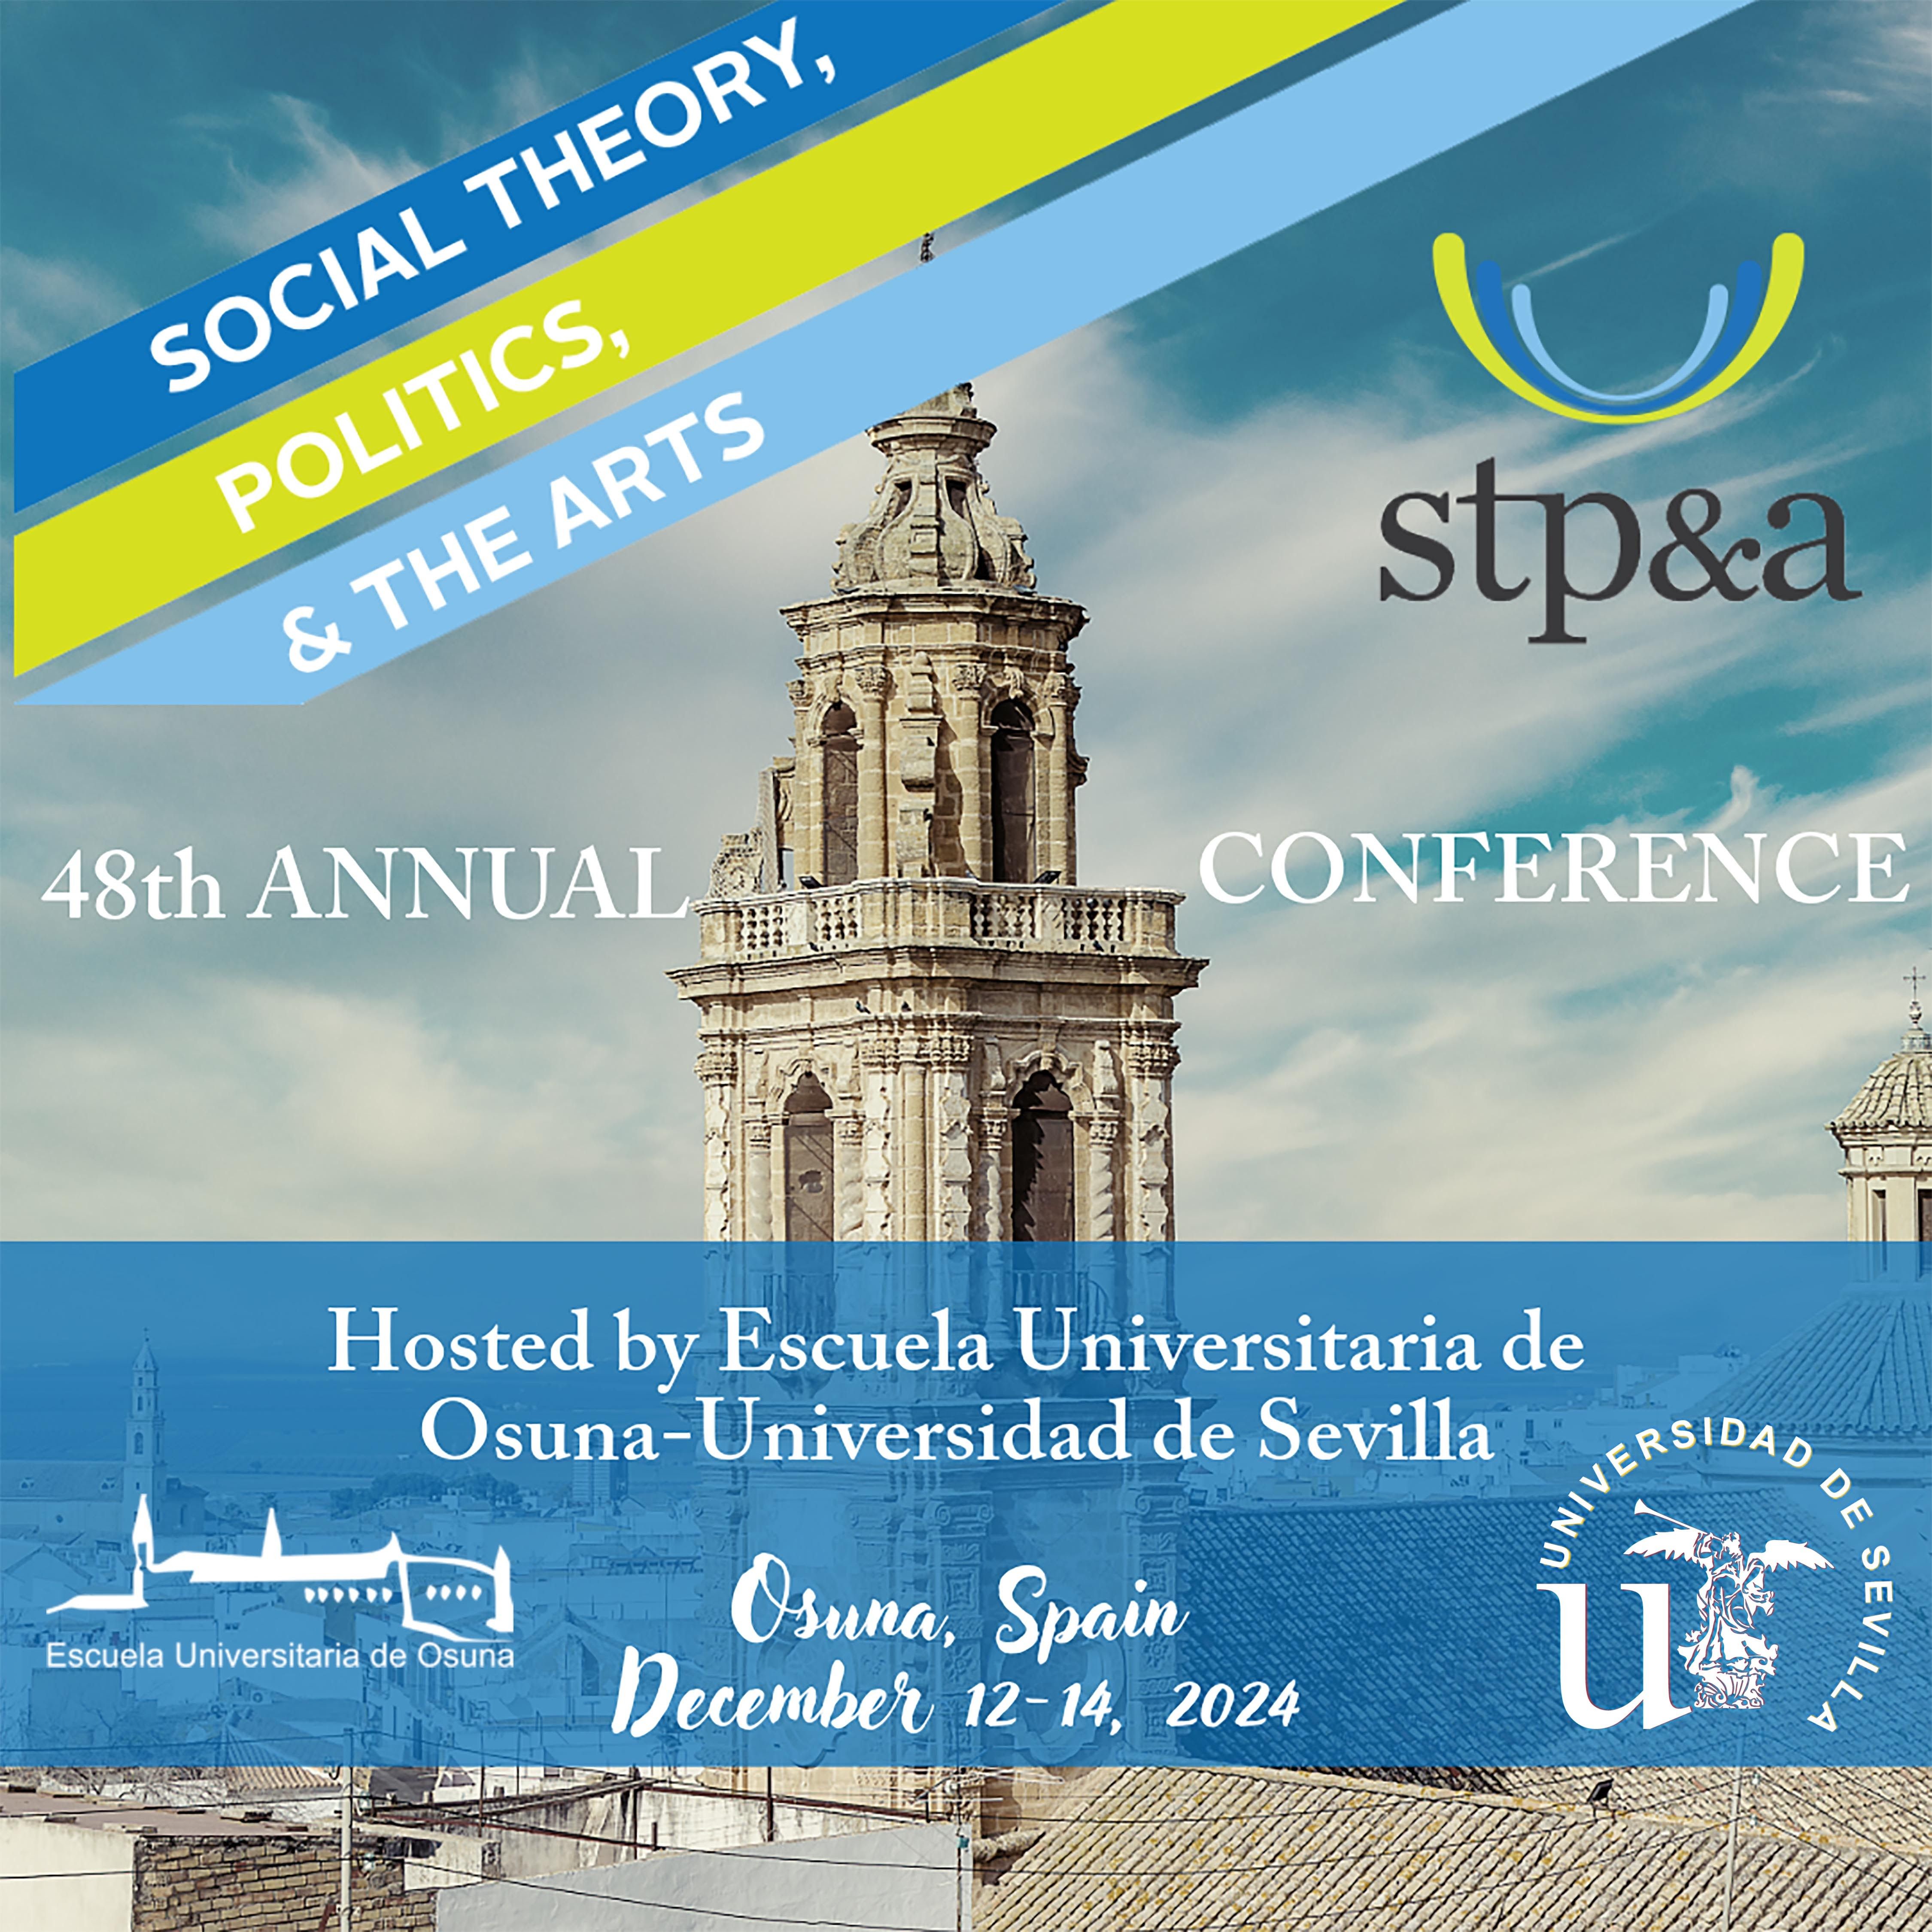 48th Annual Conference Social Theory, Politics, & the Arts